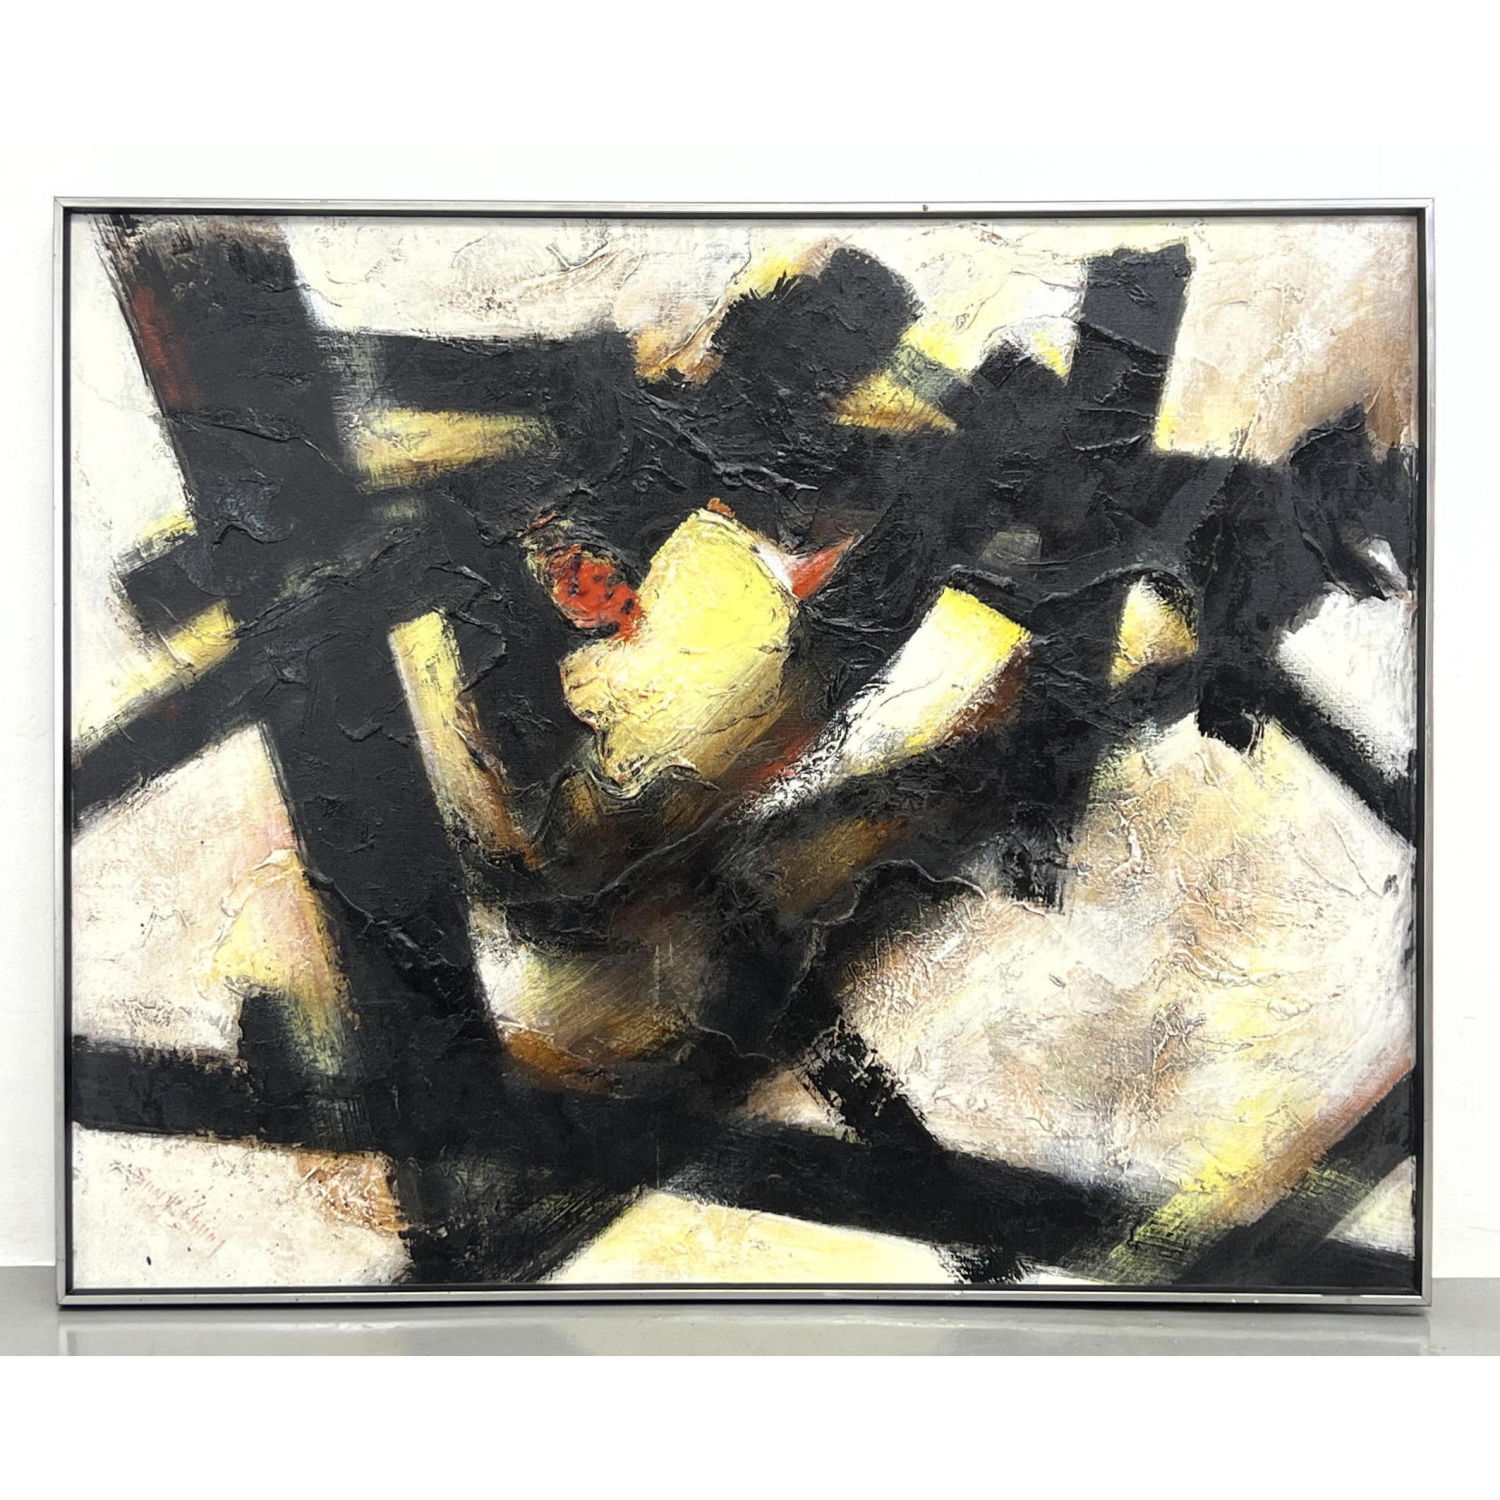 SUNY CHUNG Abstract Expressionist 2b8b8d